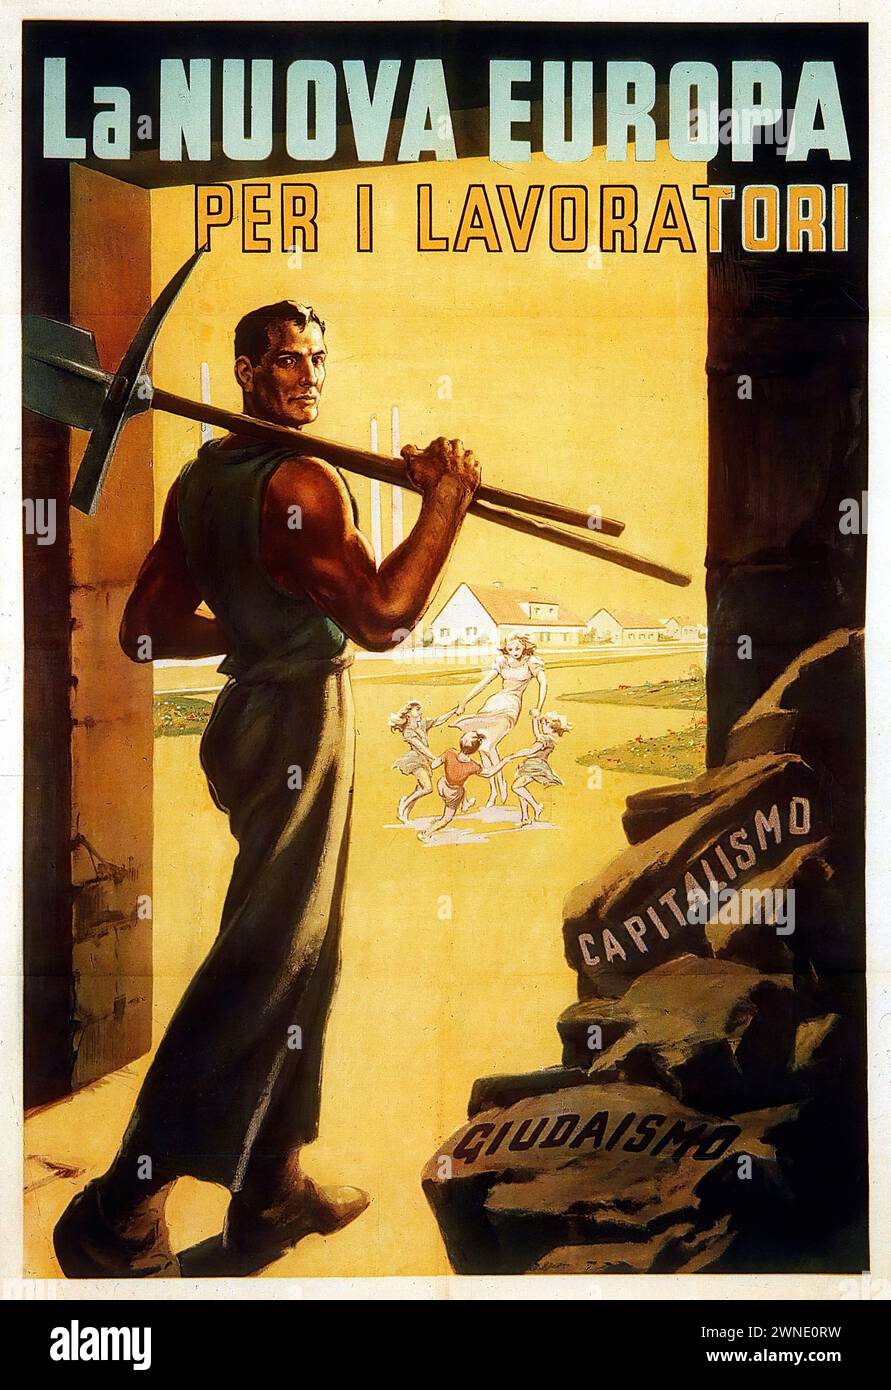 'La NUOVA EUROPA PER I LAVORATORI' ['THE NEW EUROPE FOR WORKERS'] Vintage Italian Advertising depicting a muscular worker with a sledgehammer over his shoulder, with imagery suggesting the destruction of capitalism and Judaism. The style is stark and propagandistic, typical of the mid-20th-century wartime era. Stock Photo